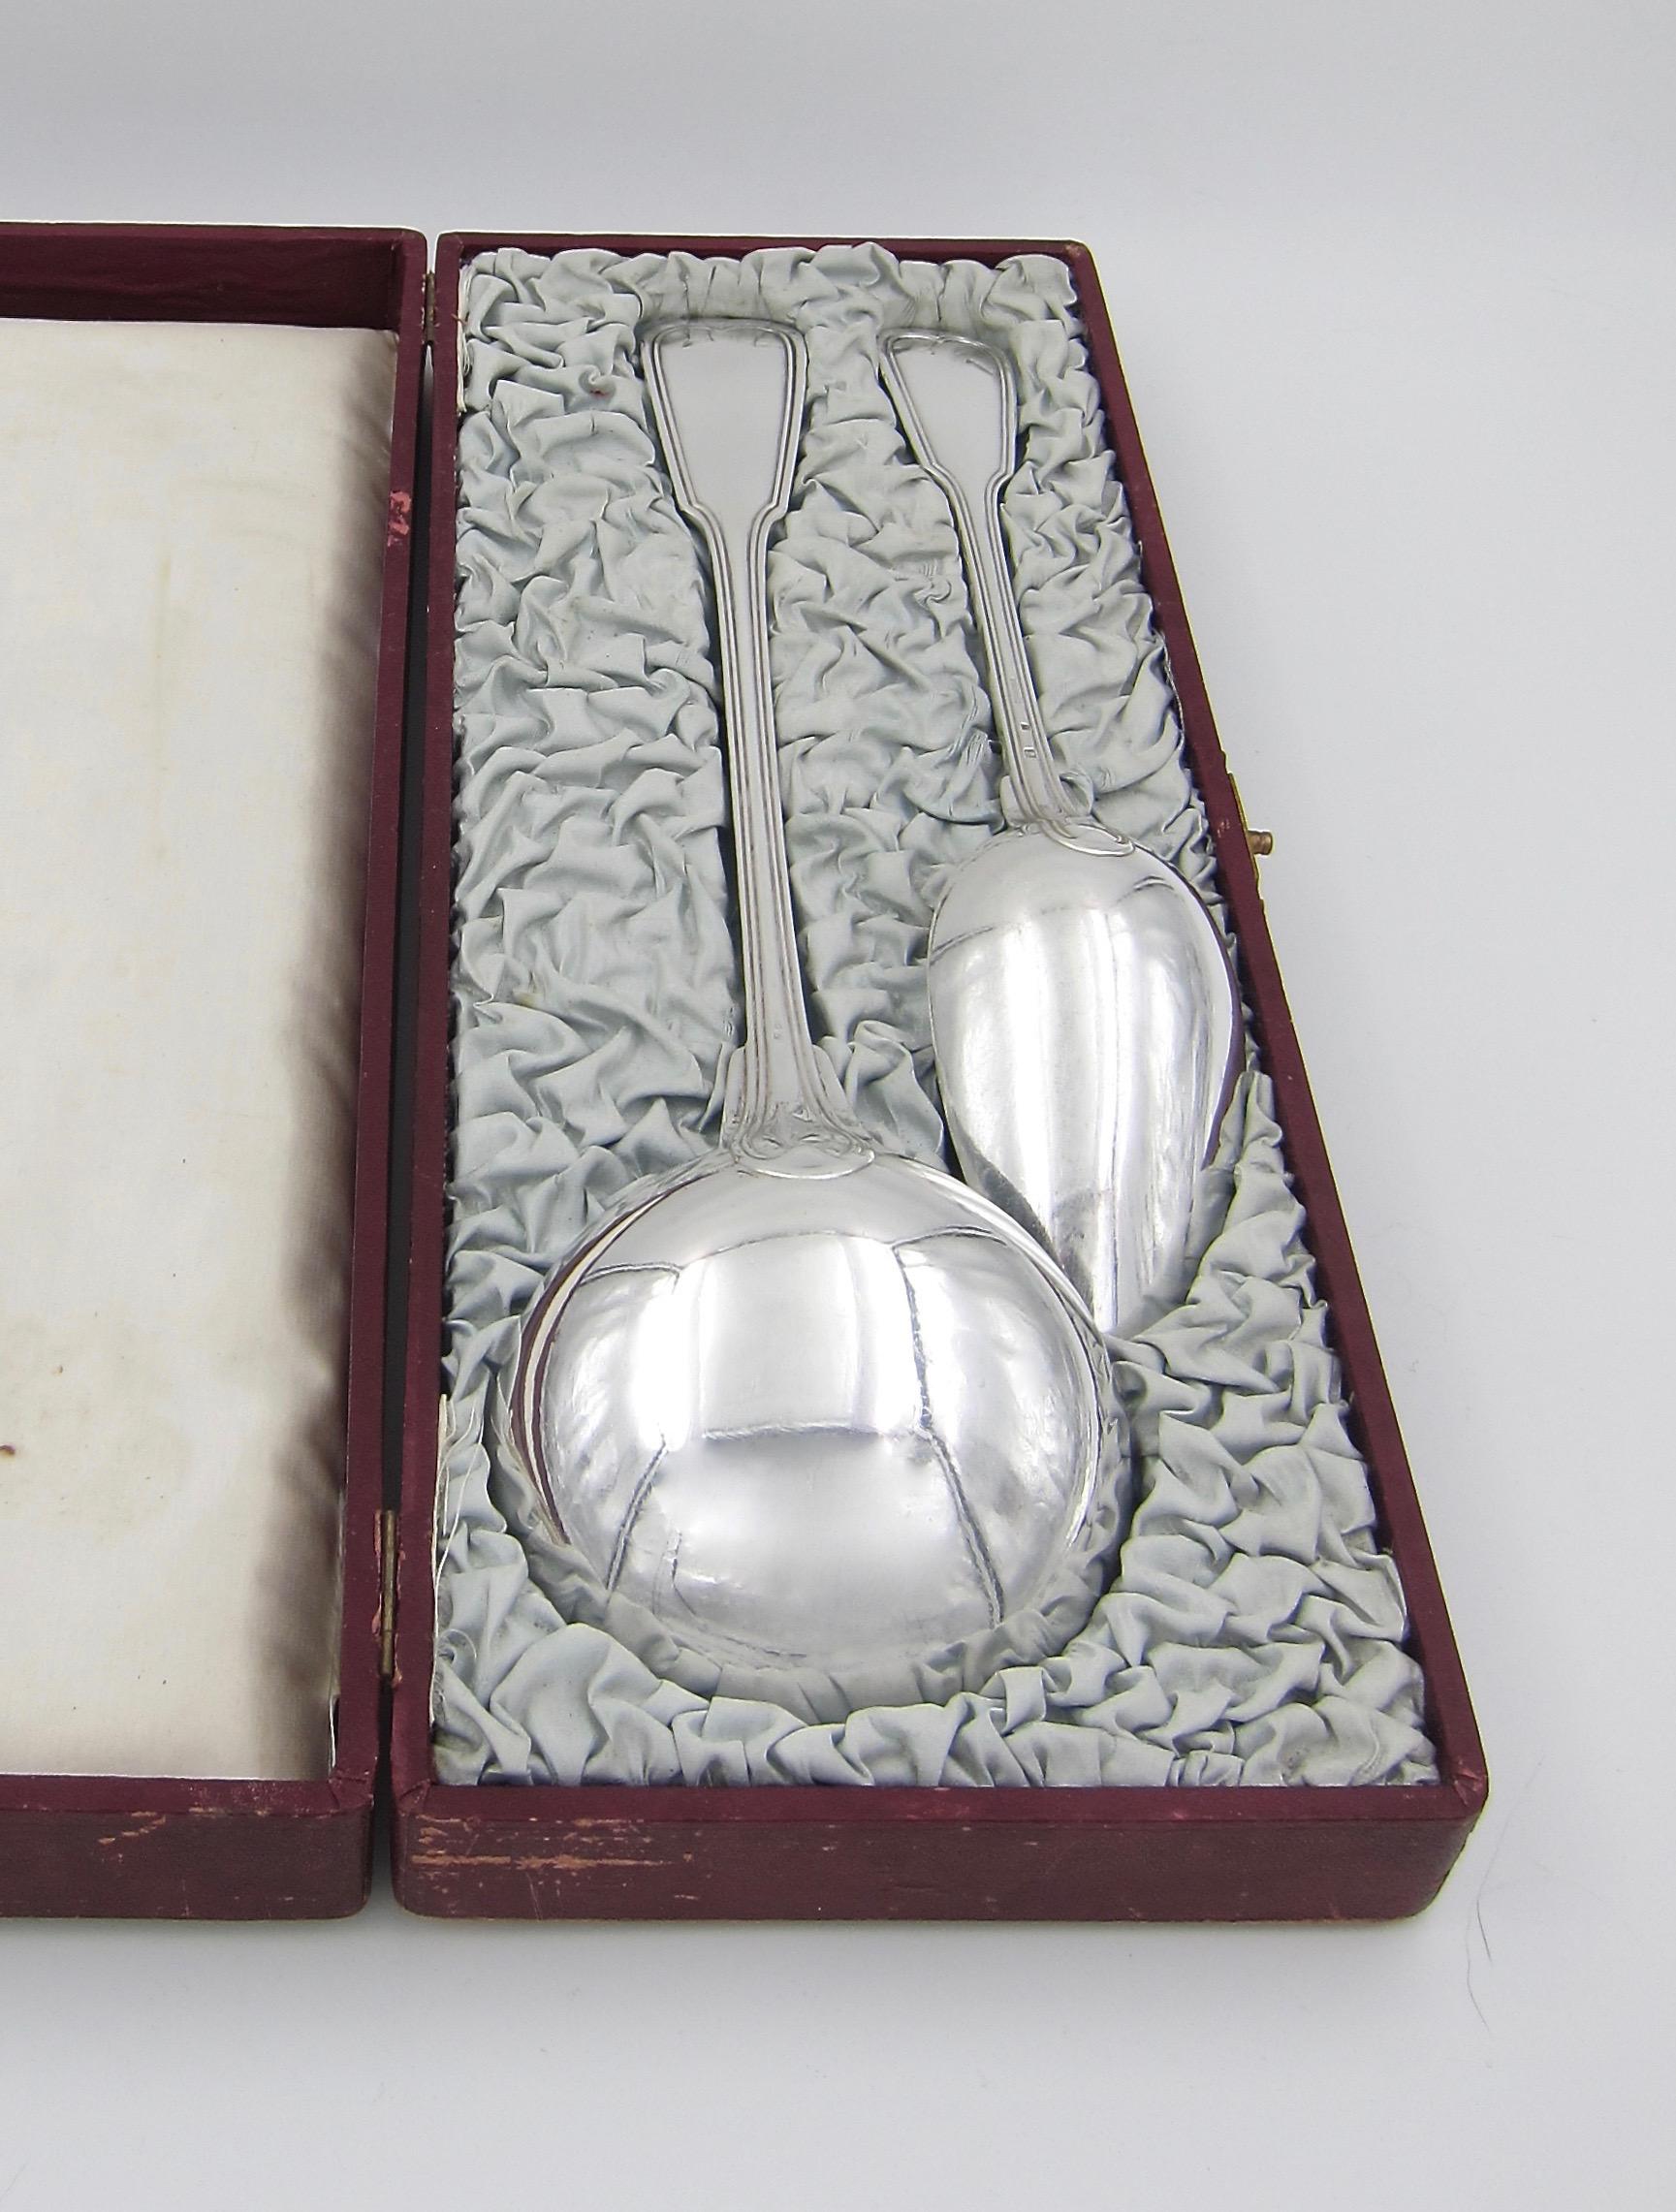 A large antique serving spoon and ladle in heavy silver plated metal Blanc (white metal) from Christofle of France. The French serving utensils were made in 1878 in Christofle's Chinon pattern, also called Fiddle and Thread. The pieces retain their